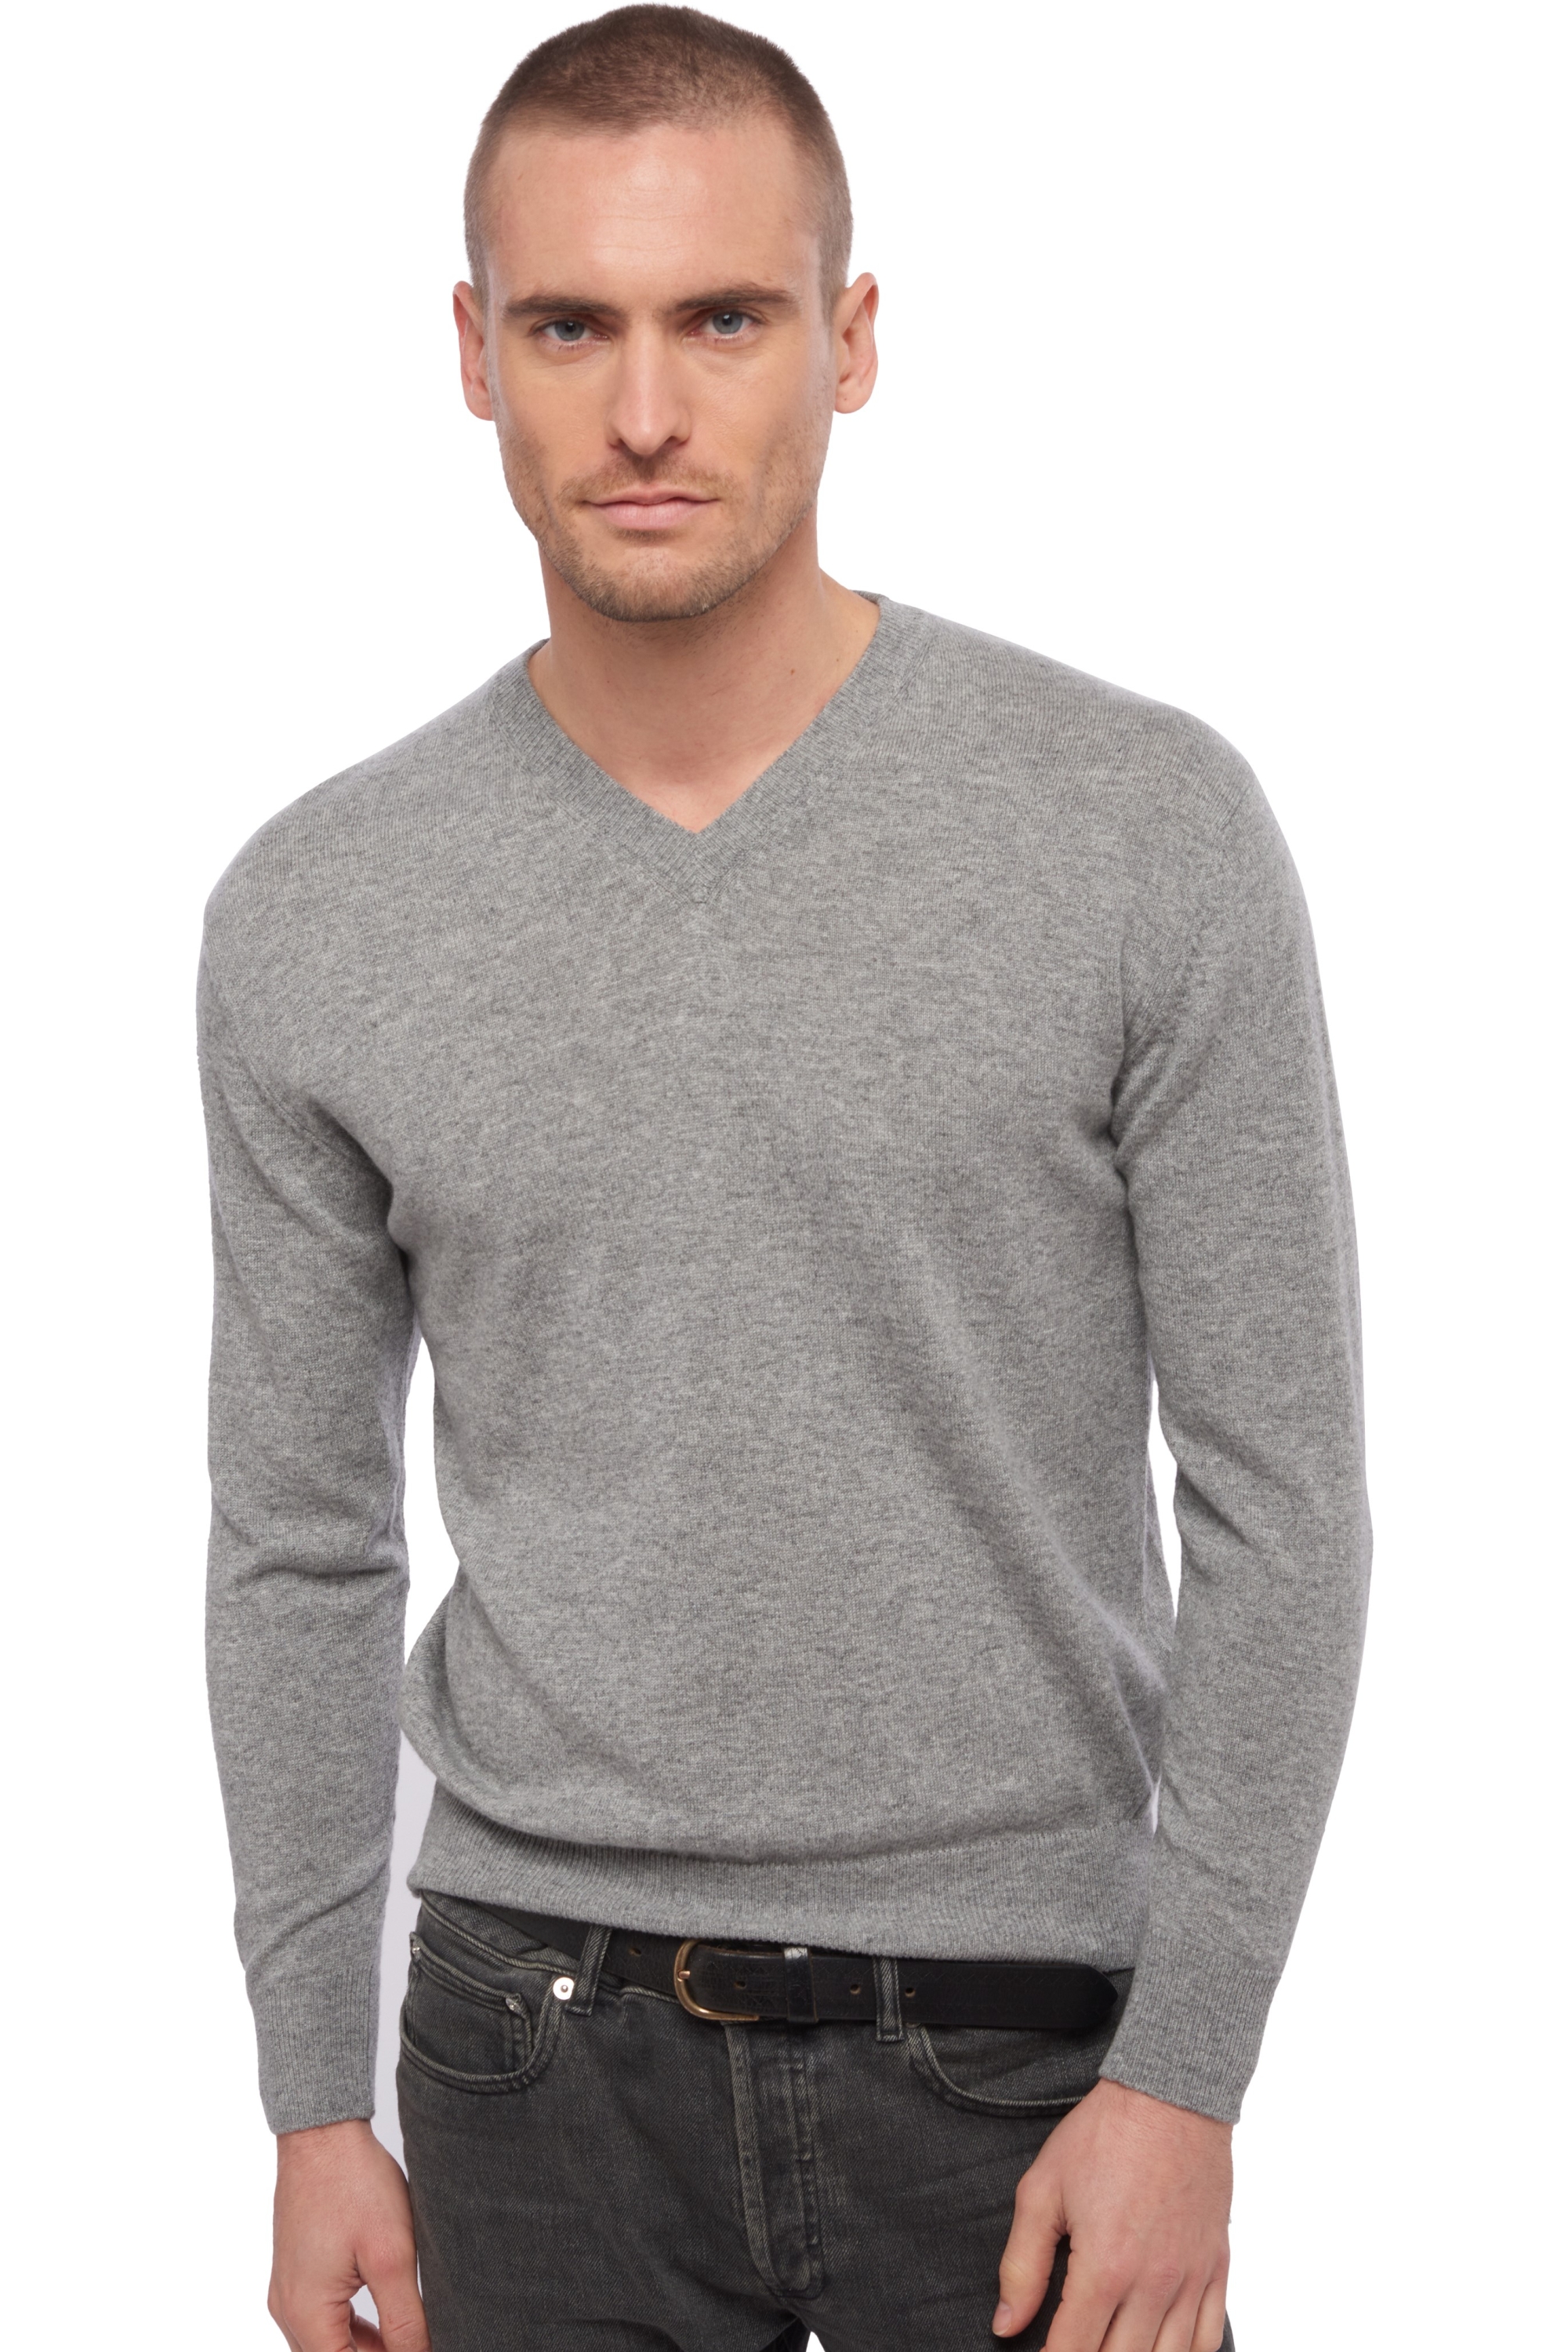 Cachemire pull homme col v hippolyte gris chine 3xl